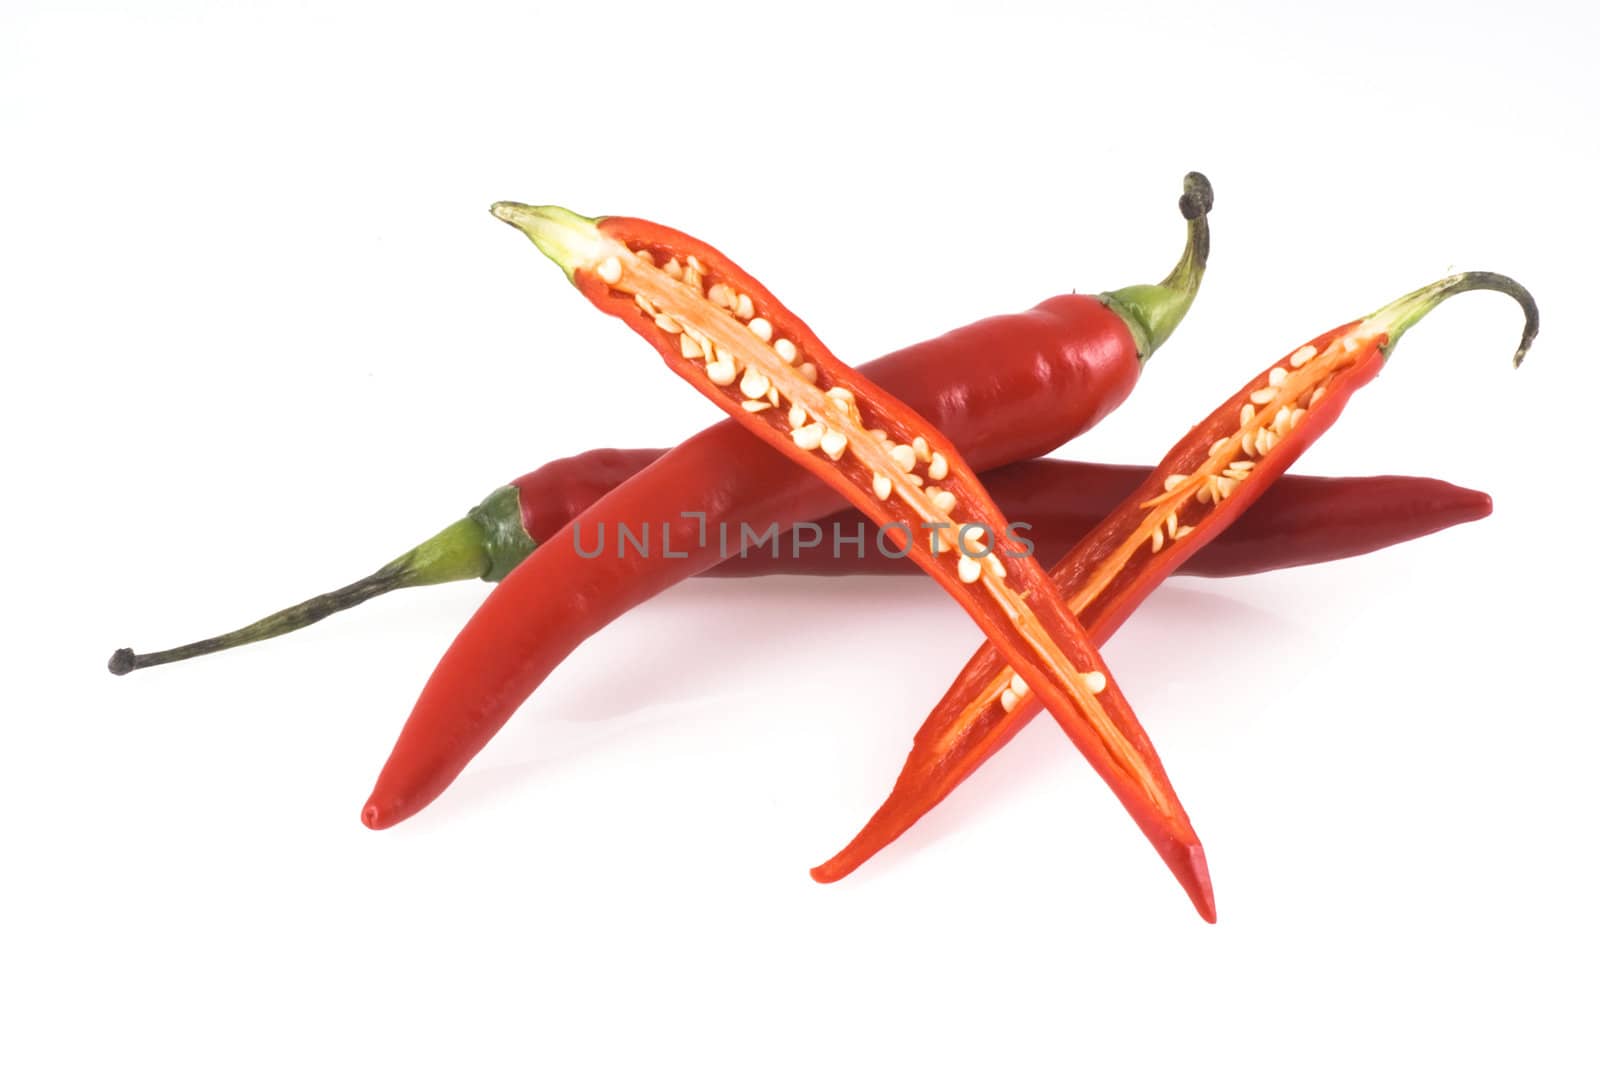 Three red chili peppers on a white background, two unimpaired and one cut open.